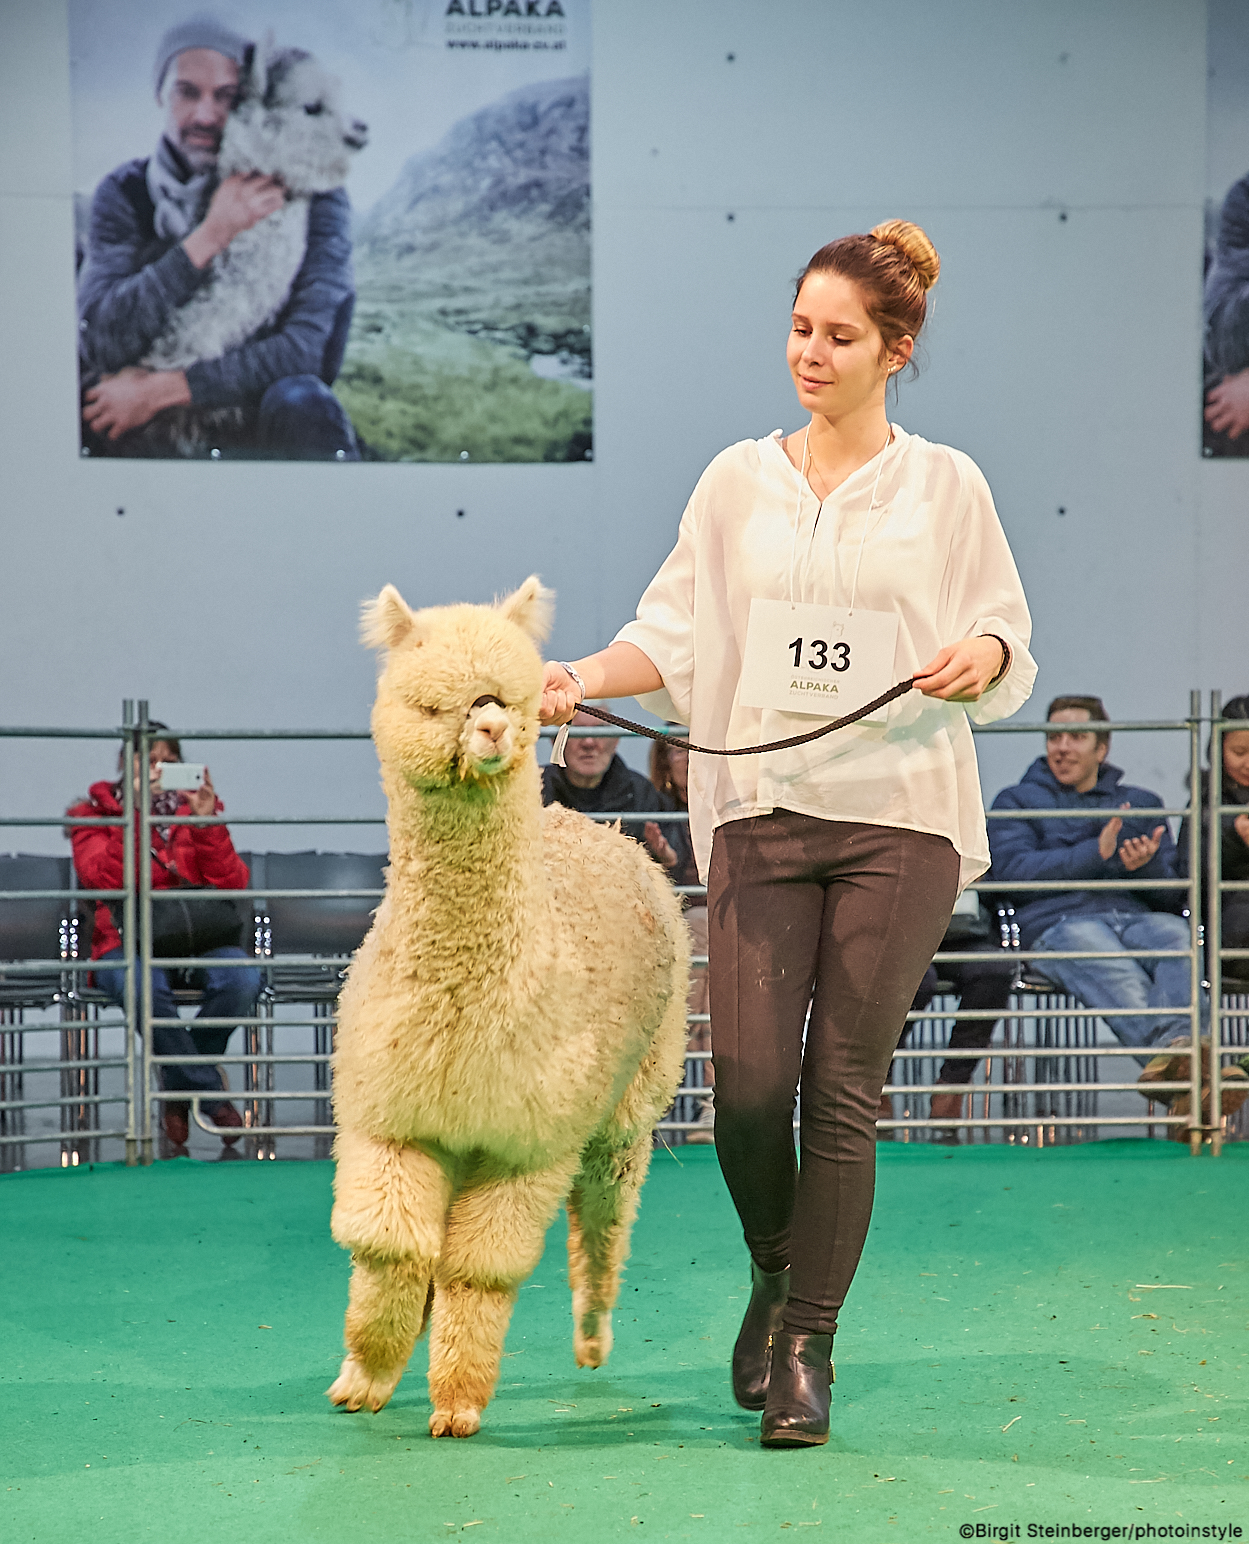  400 ALPACAS AND 150 EXCLUSIVE EXHIBITORS ARE WAITING FOR YOU IN GRAZ